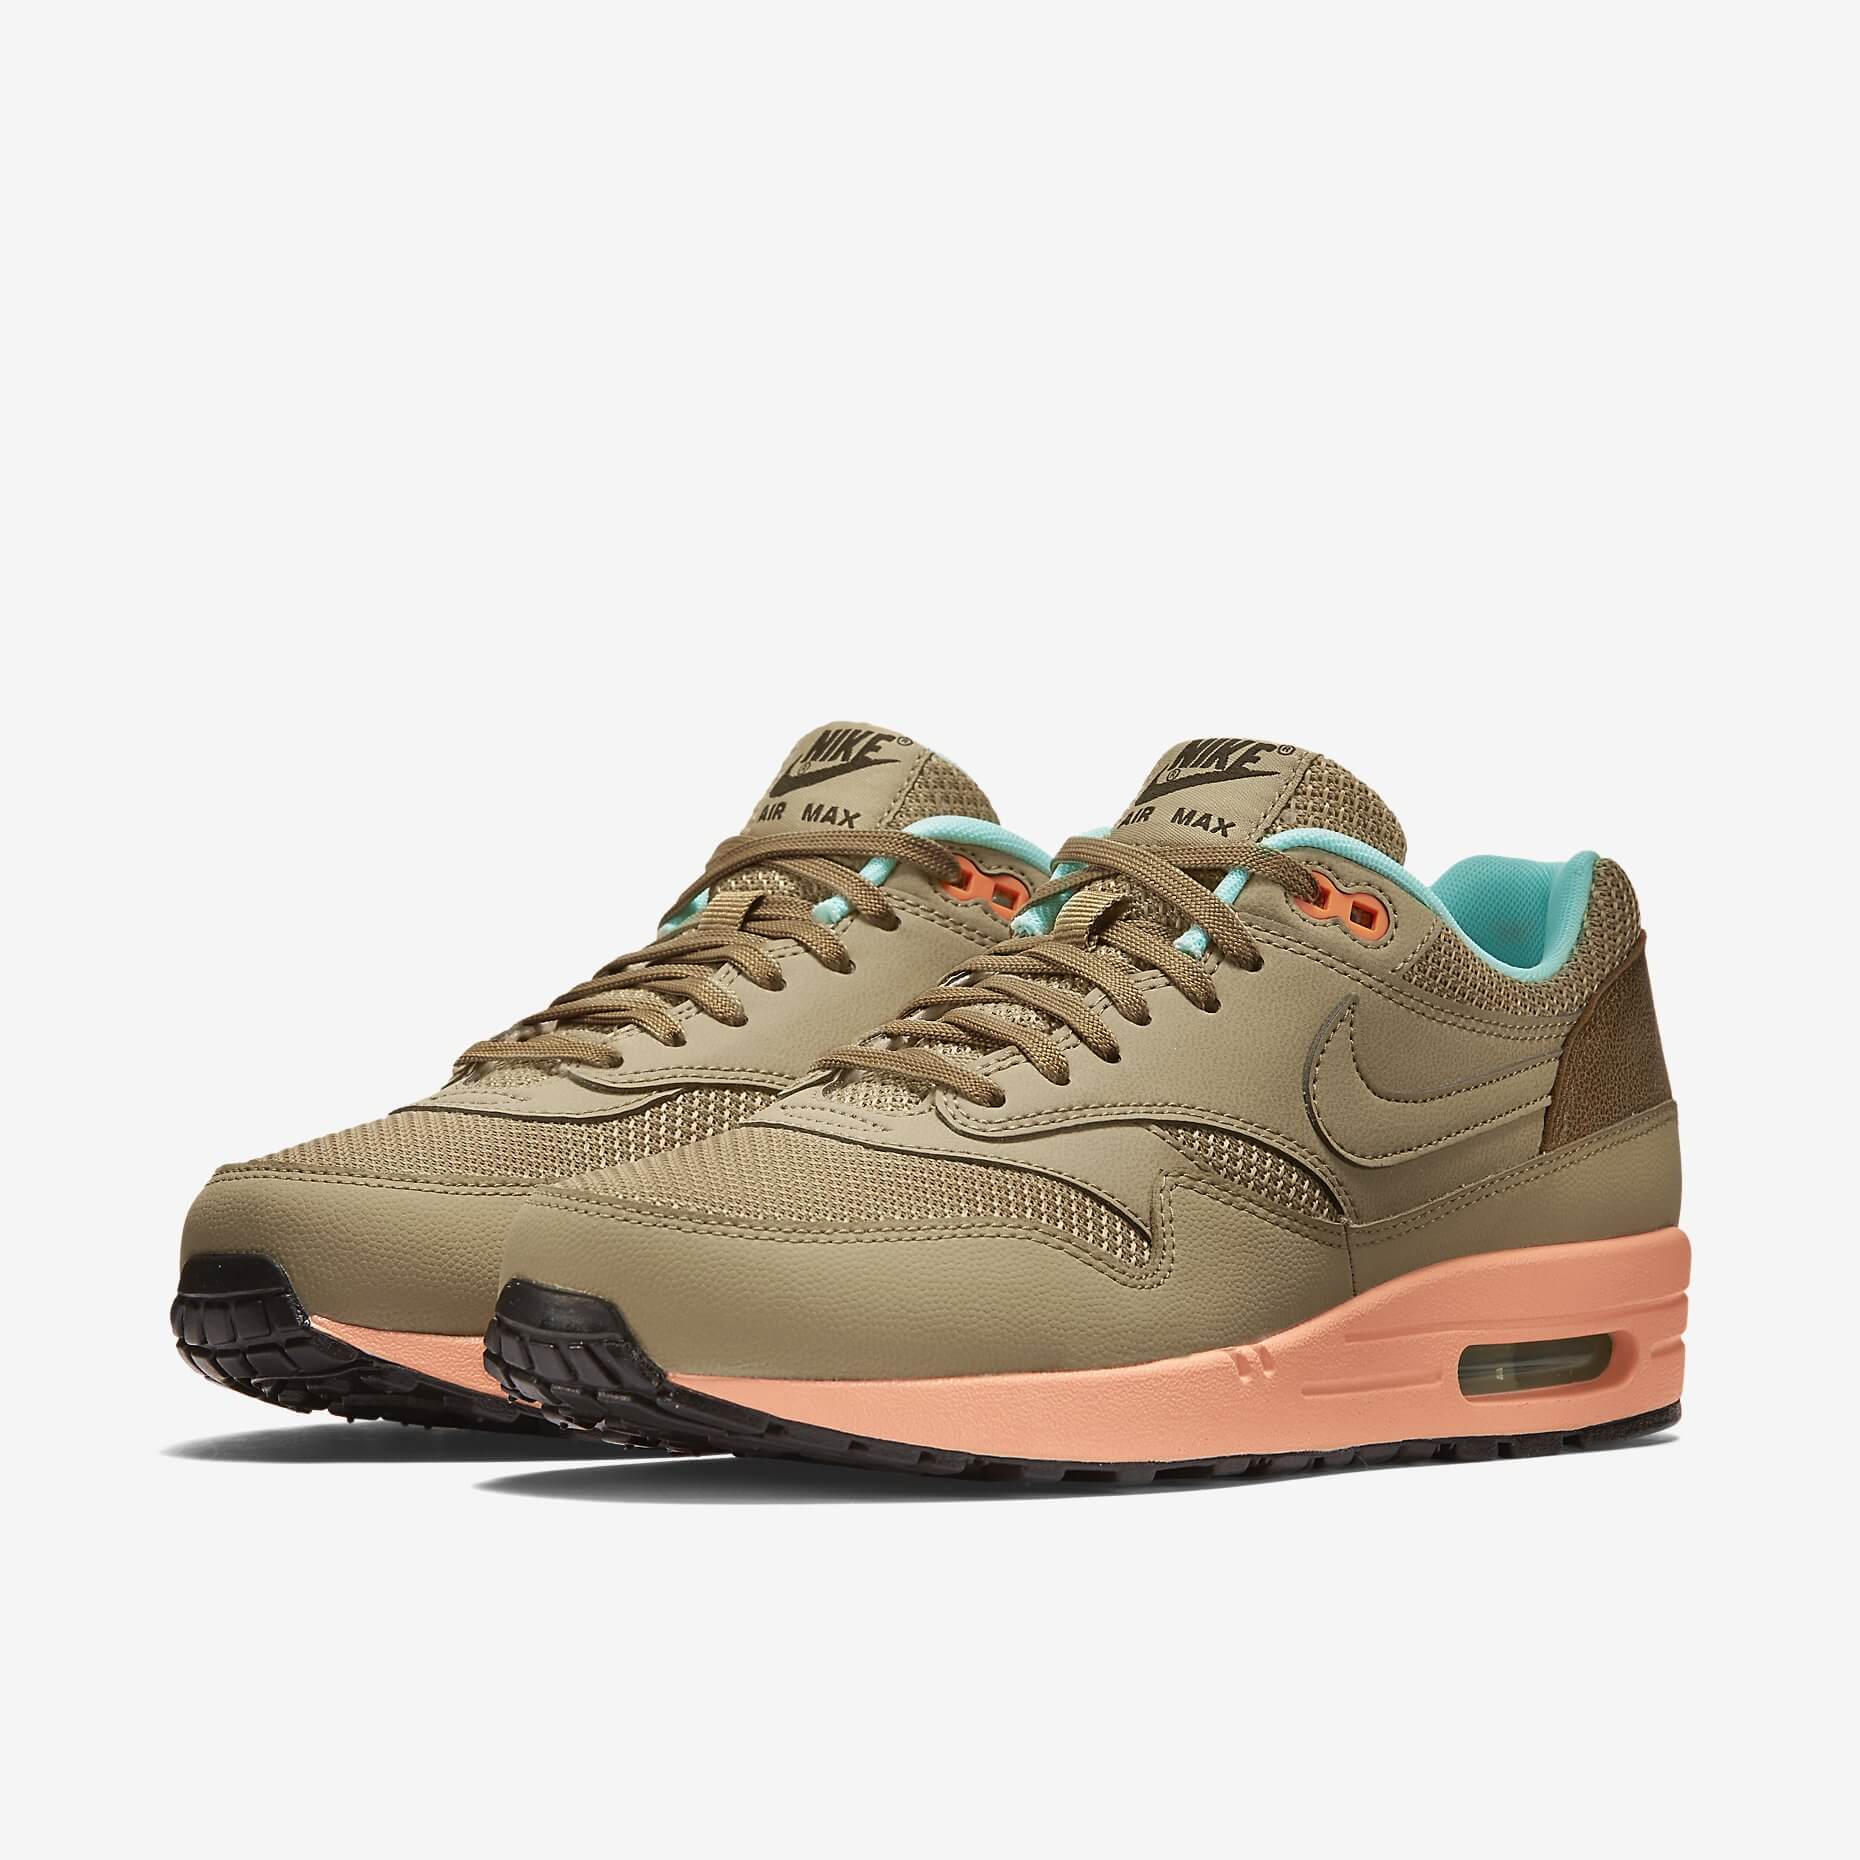 Nike Air Max 1 FB Hay Sunset Glow - Where To Buy - 579920-200 | The ...